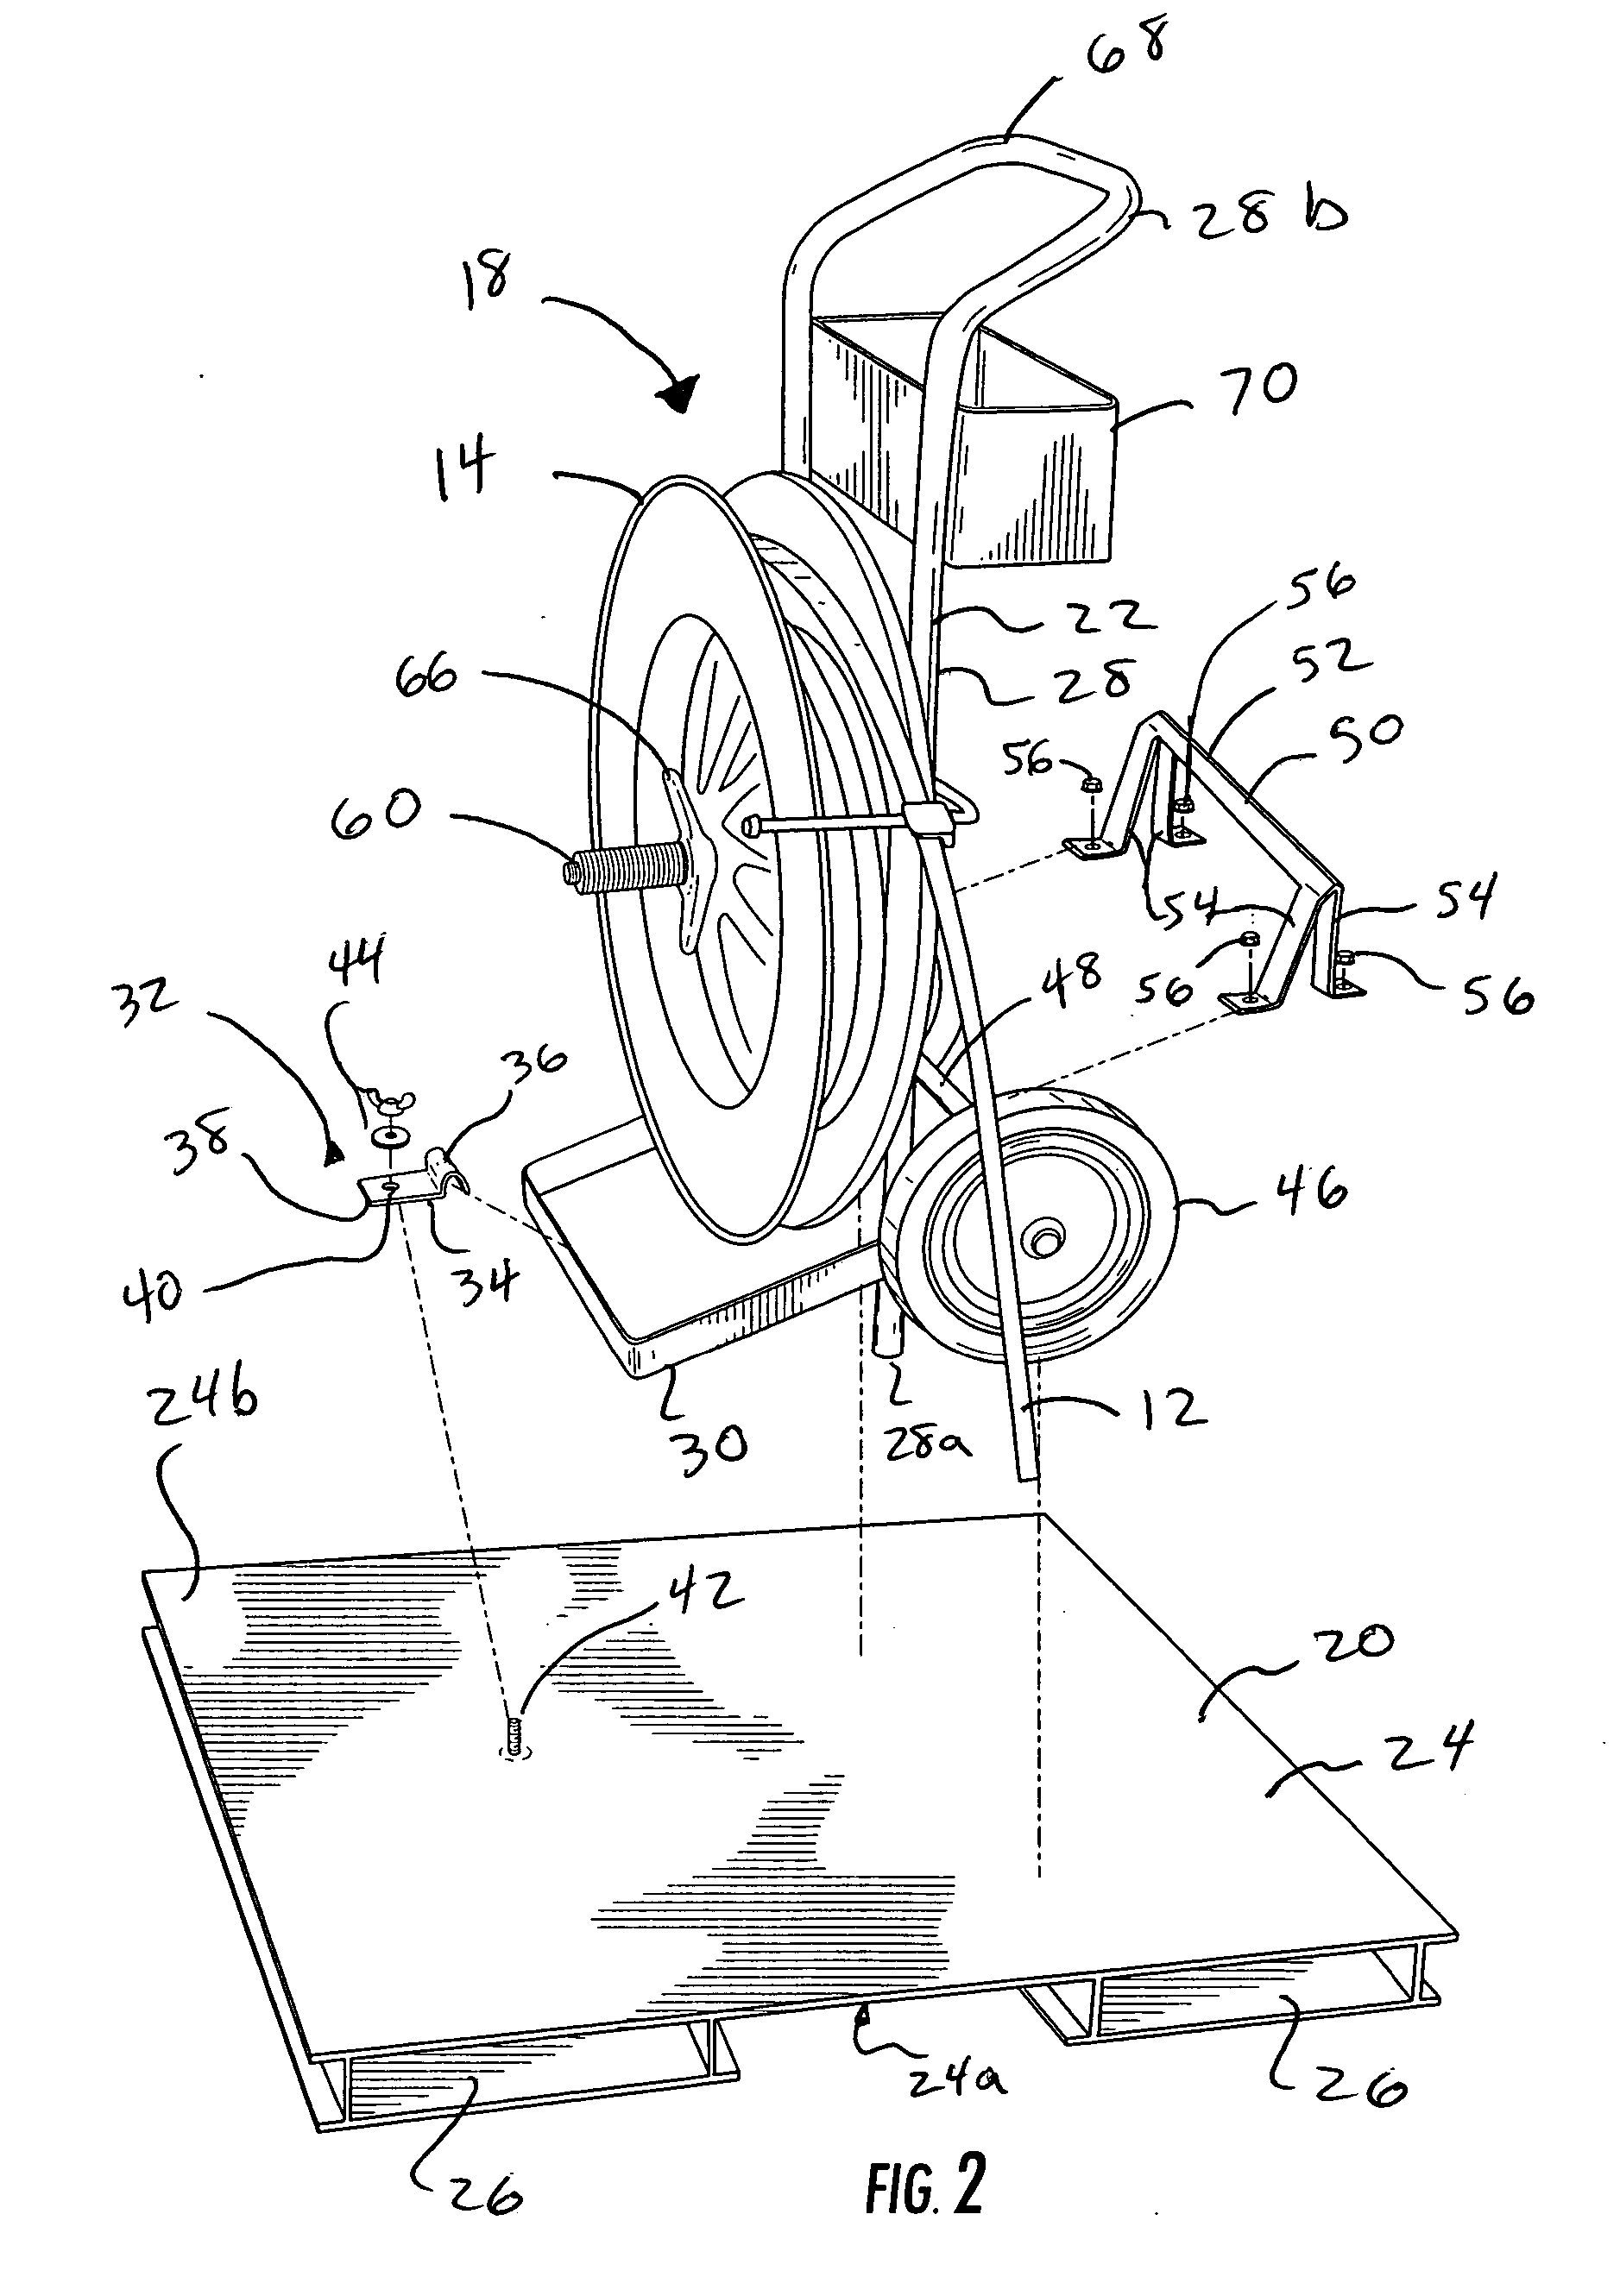 Apparatus and method for transporting and dispensing a strap